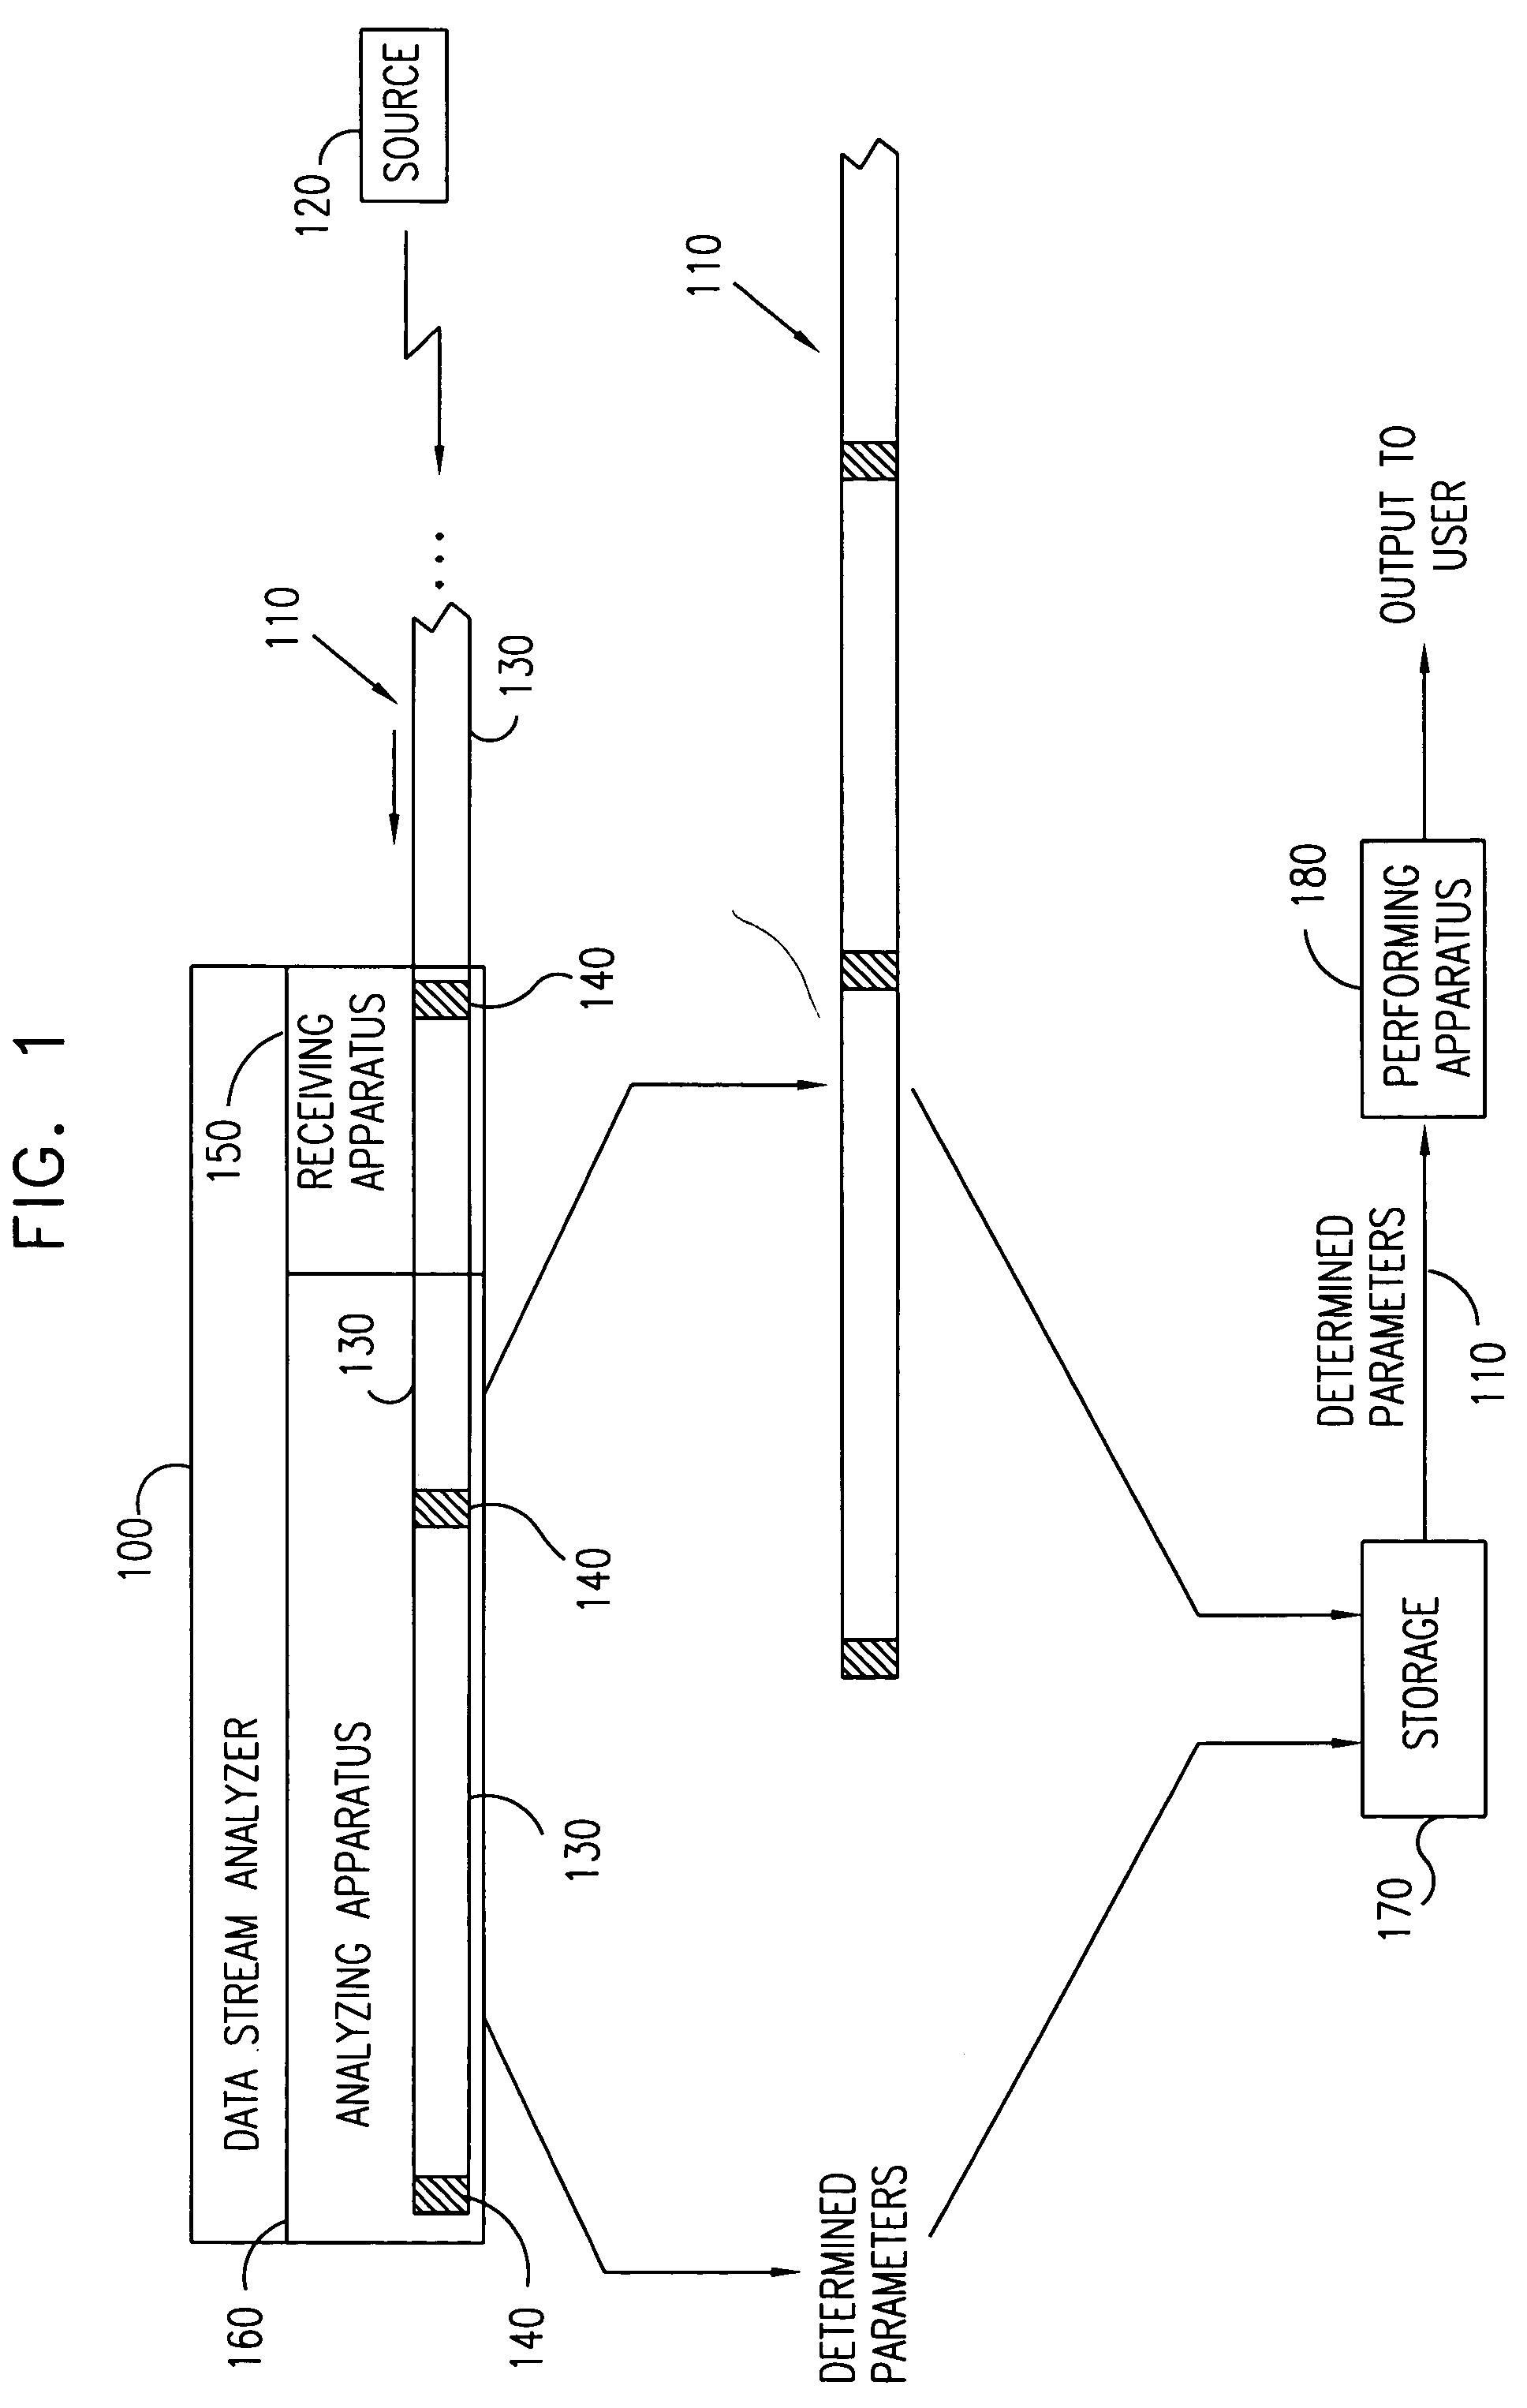 System for data stream processing